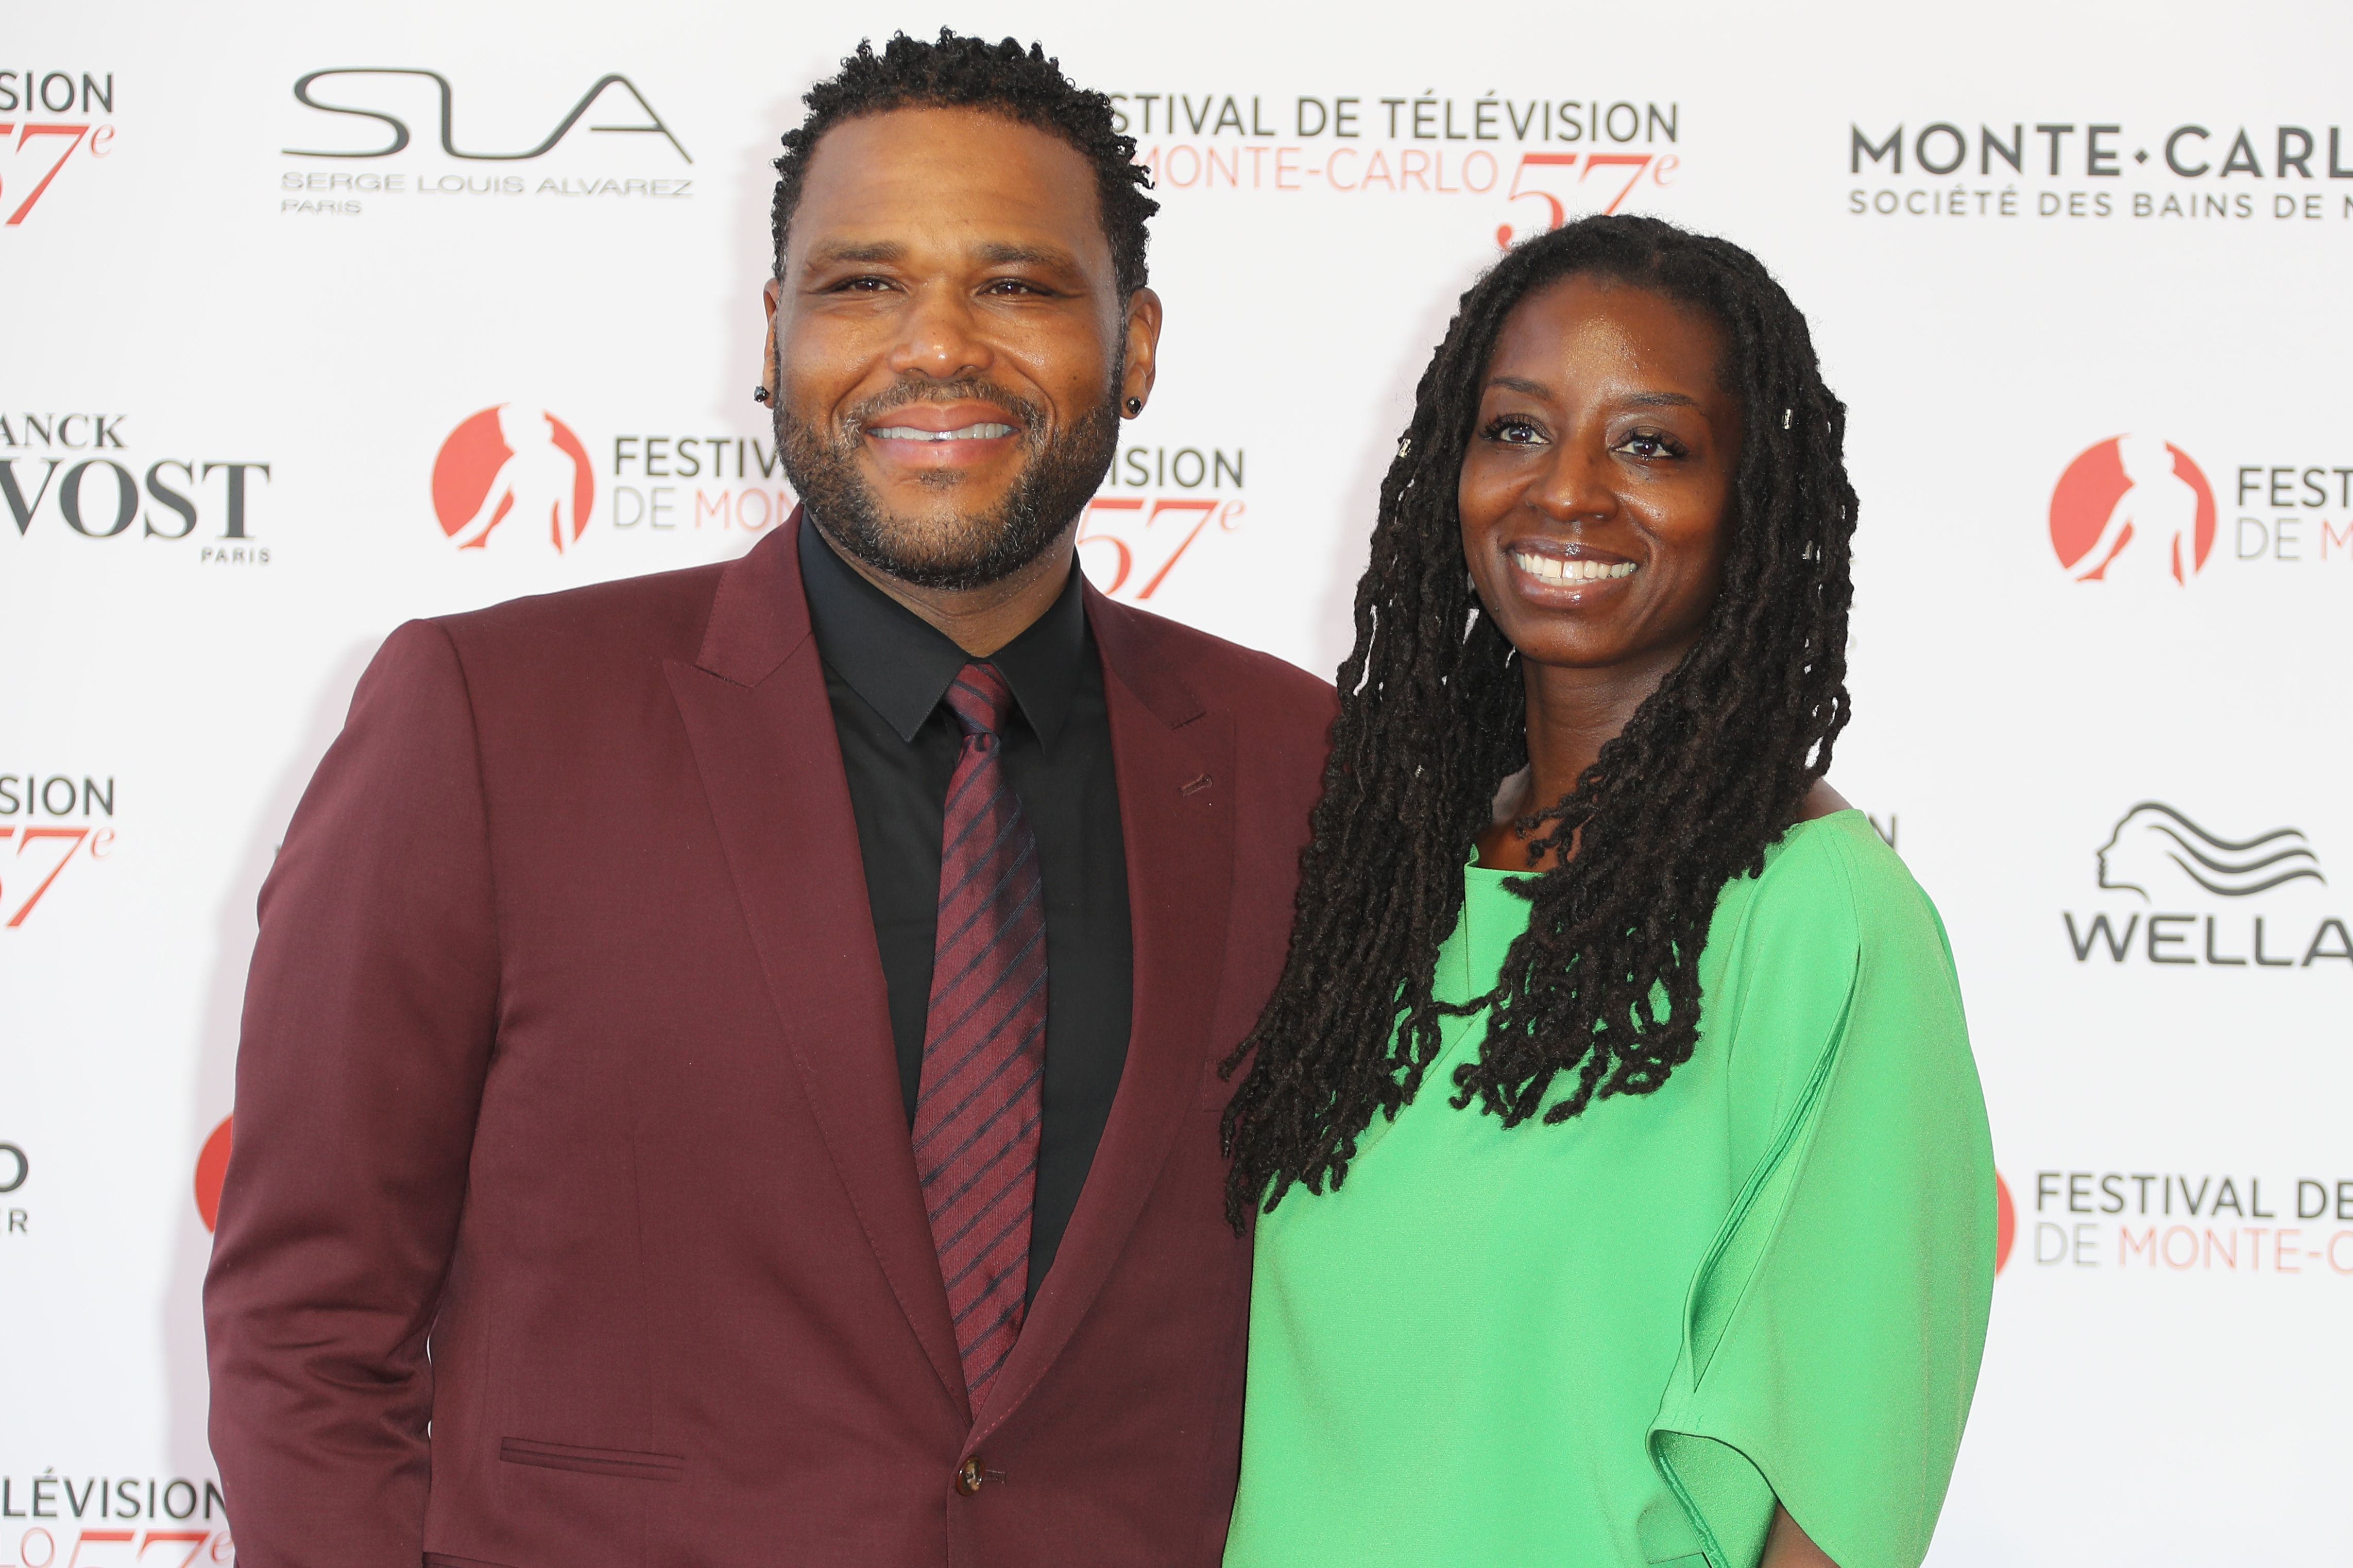 Anthony Anderson and wife Alvina Stewart smiling at the camera on the red carpet.